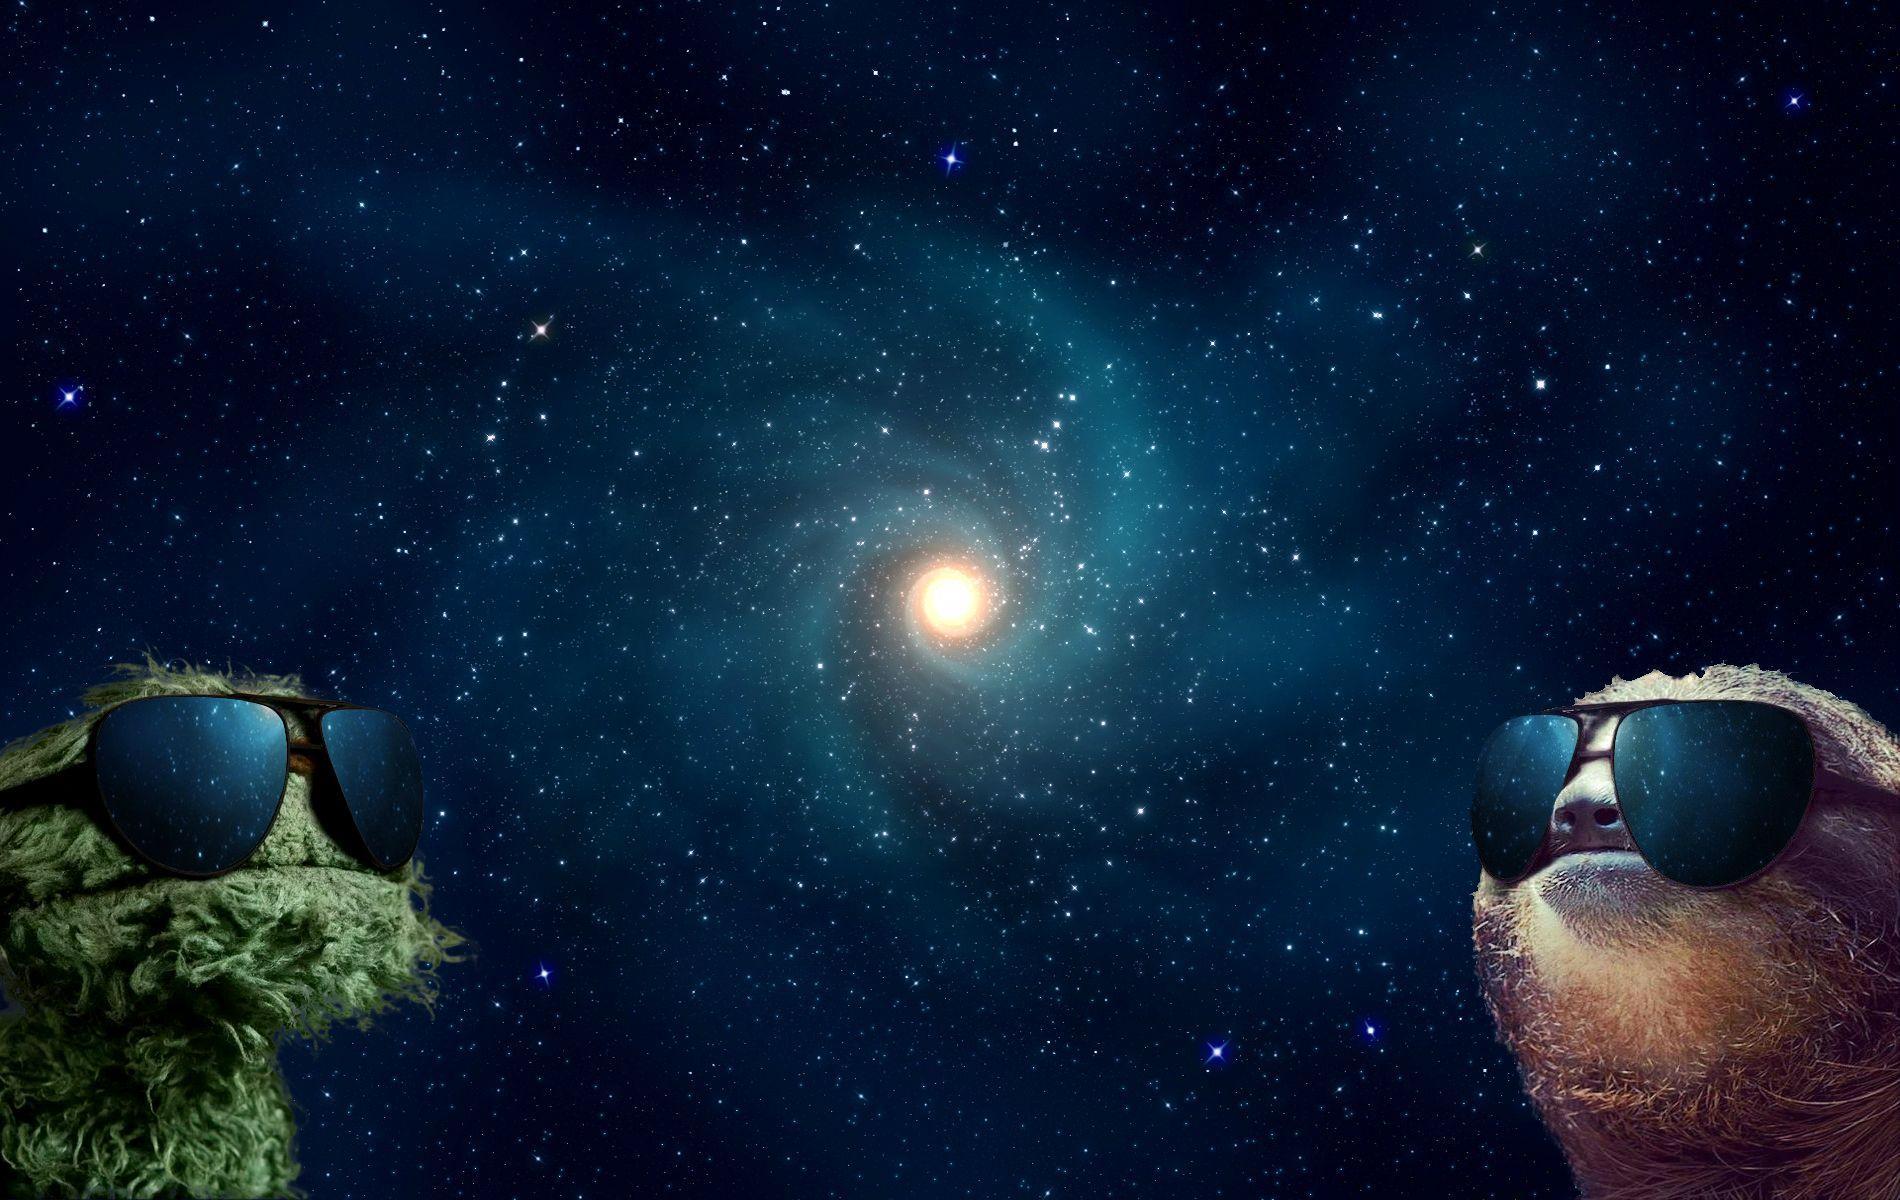 Sloth and Grover in Space HD Wallpaper. Download HD Wallpaper